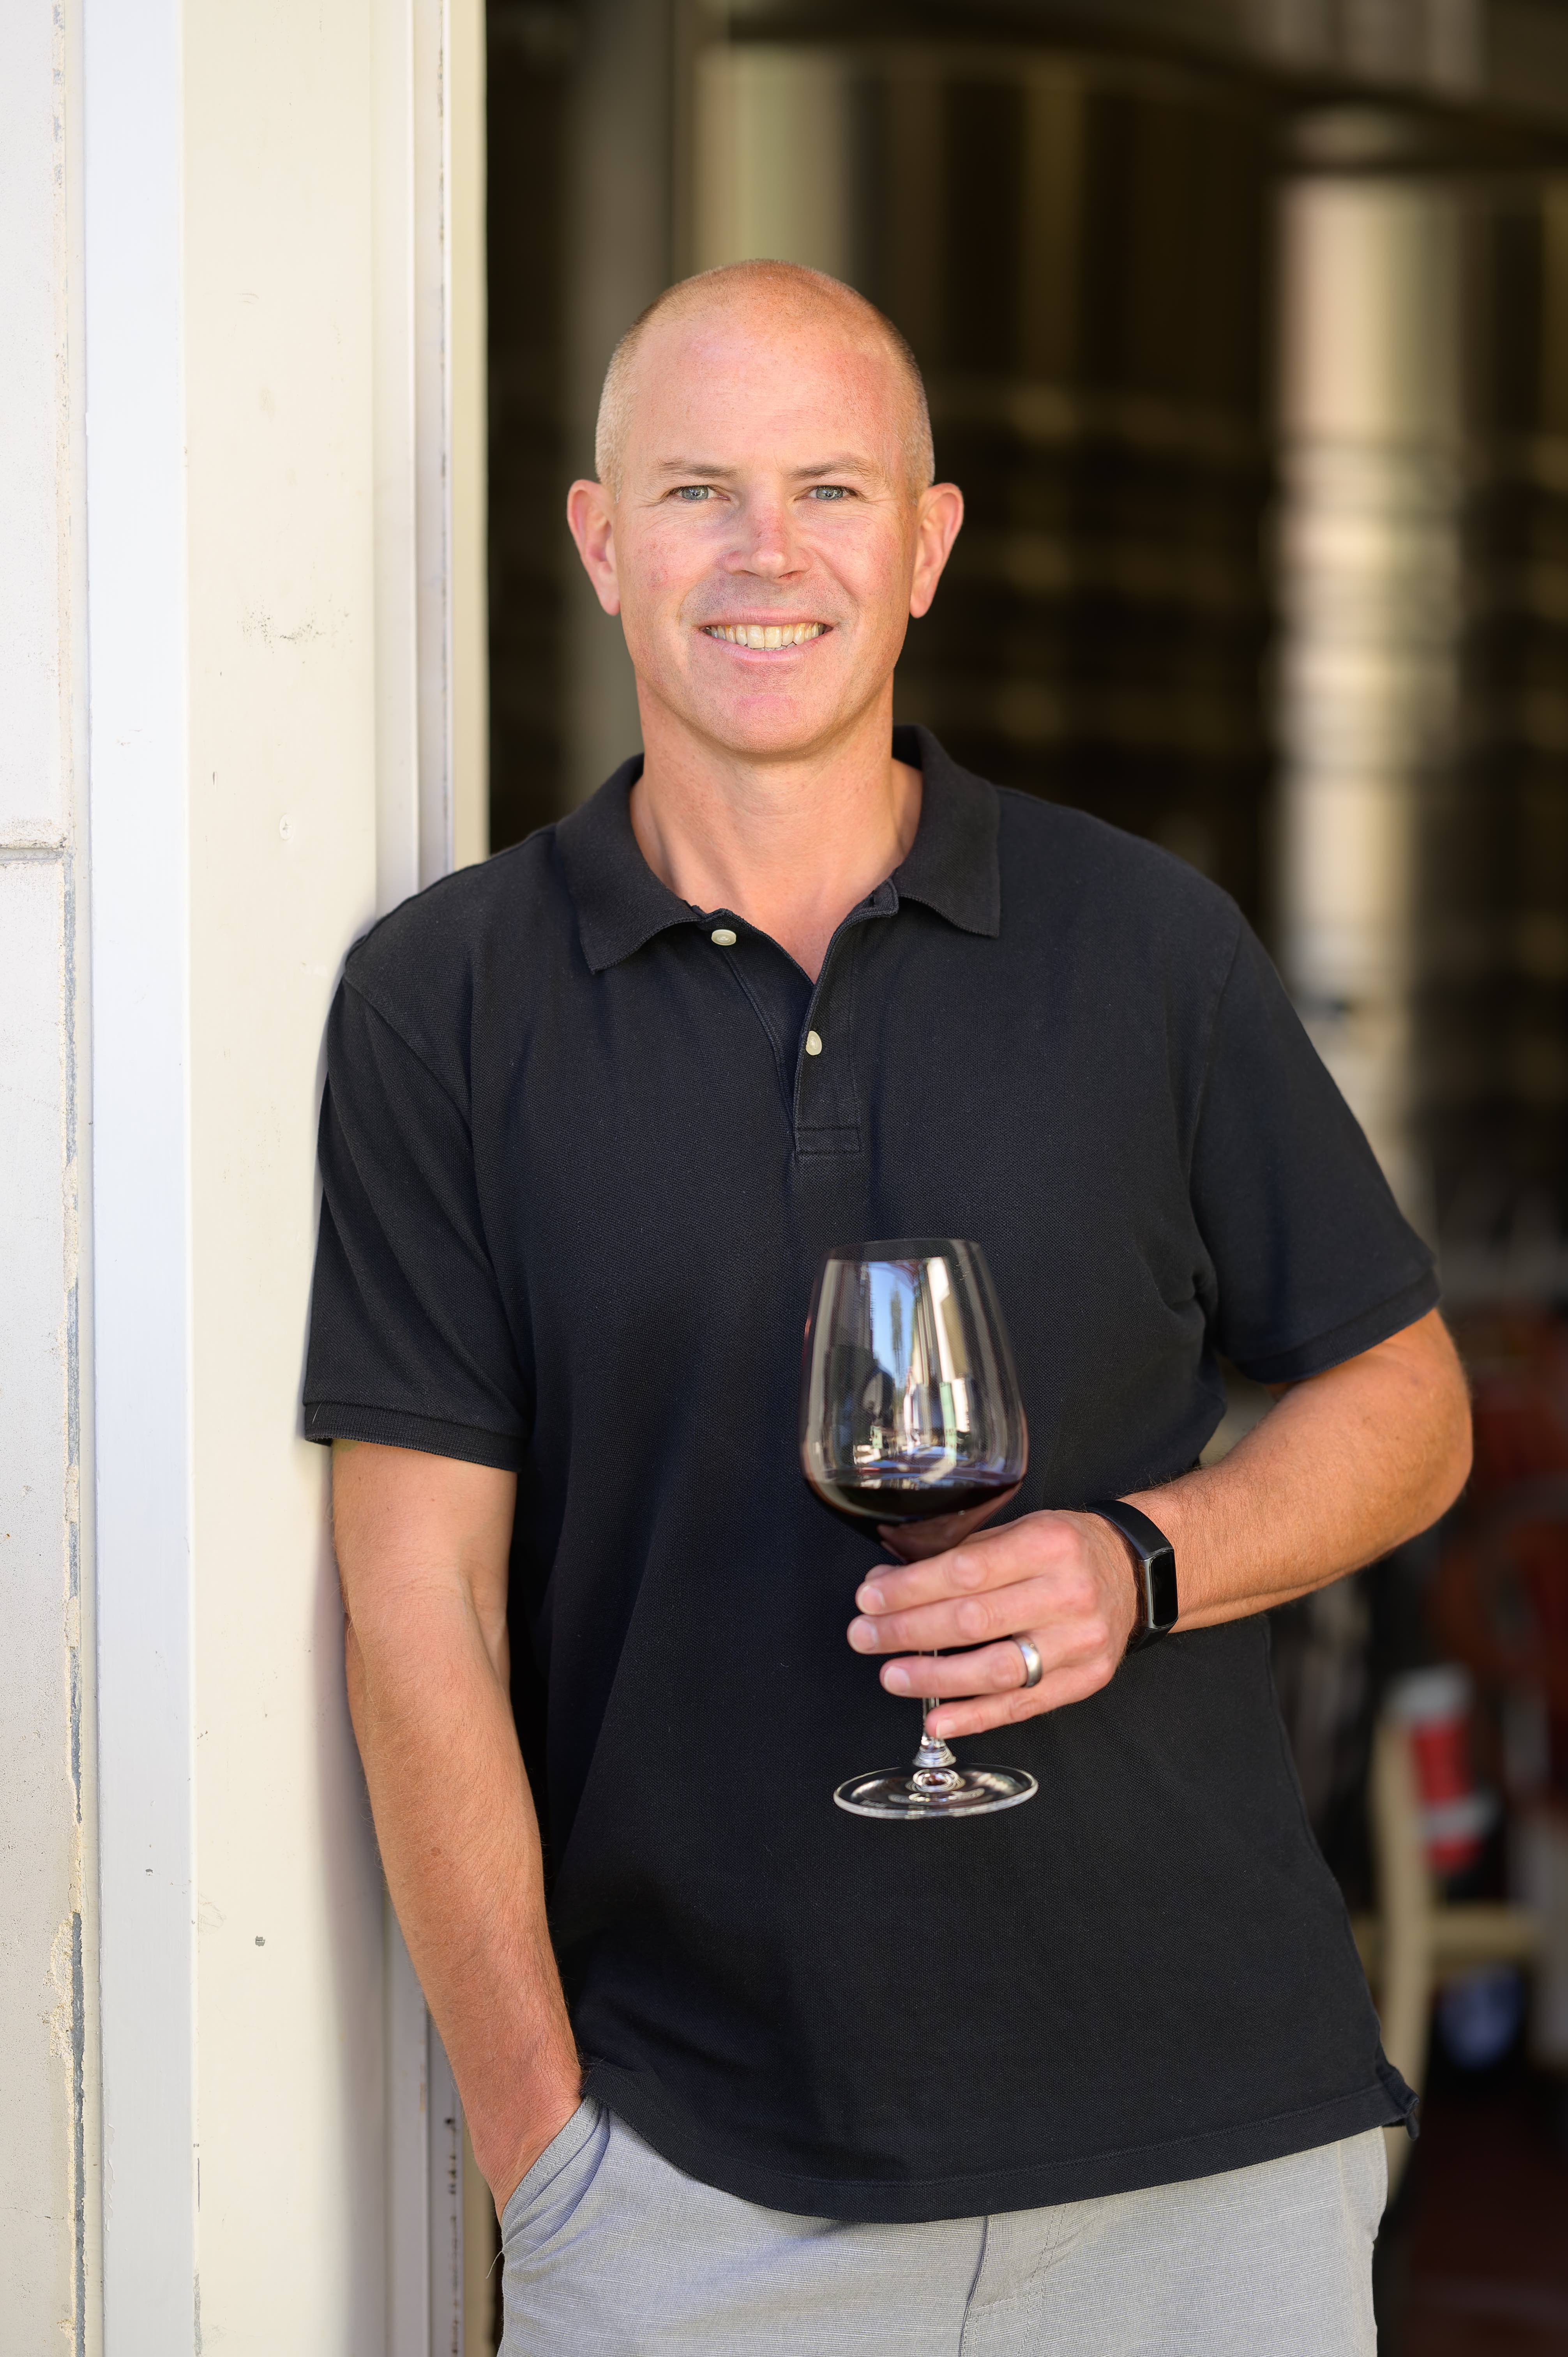 Newly promoted Vineyard 29 President and CEO Keith Emerson, has been with the winery since 2005. He remains in charge of winemaking and viticulture.